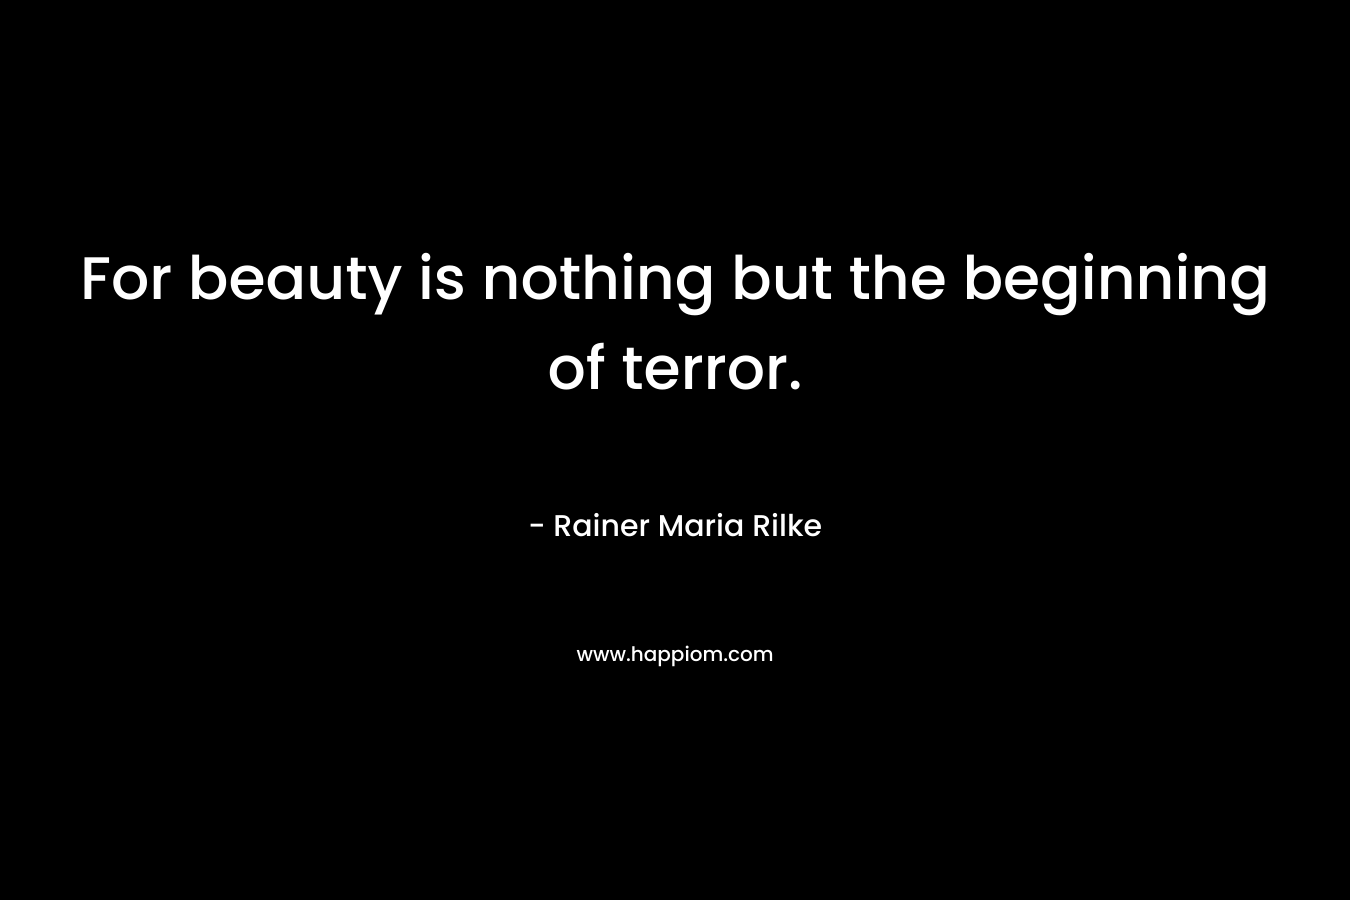 For beauty is nothing but the beginning of terror.